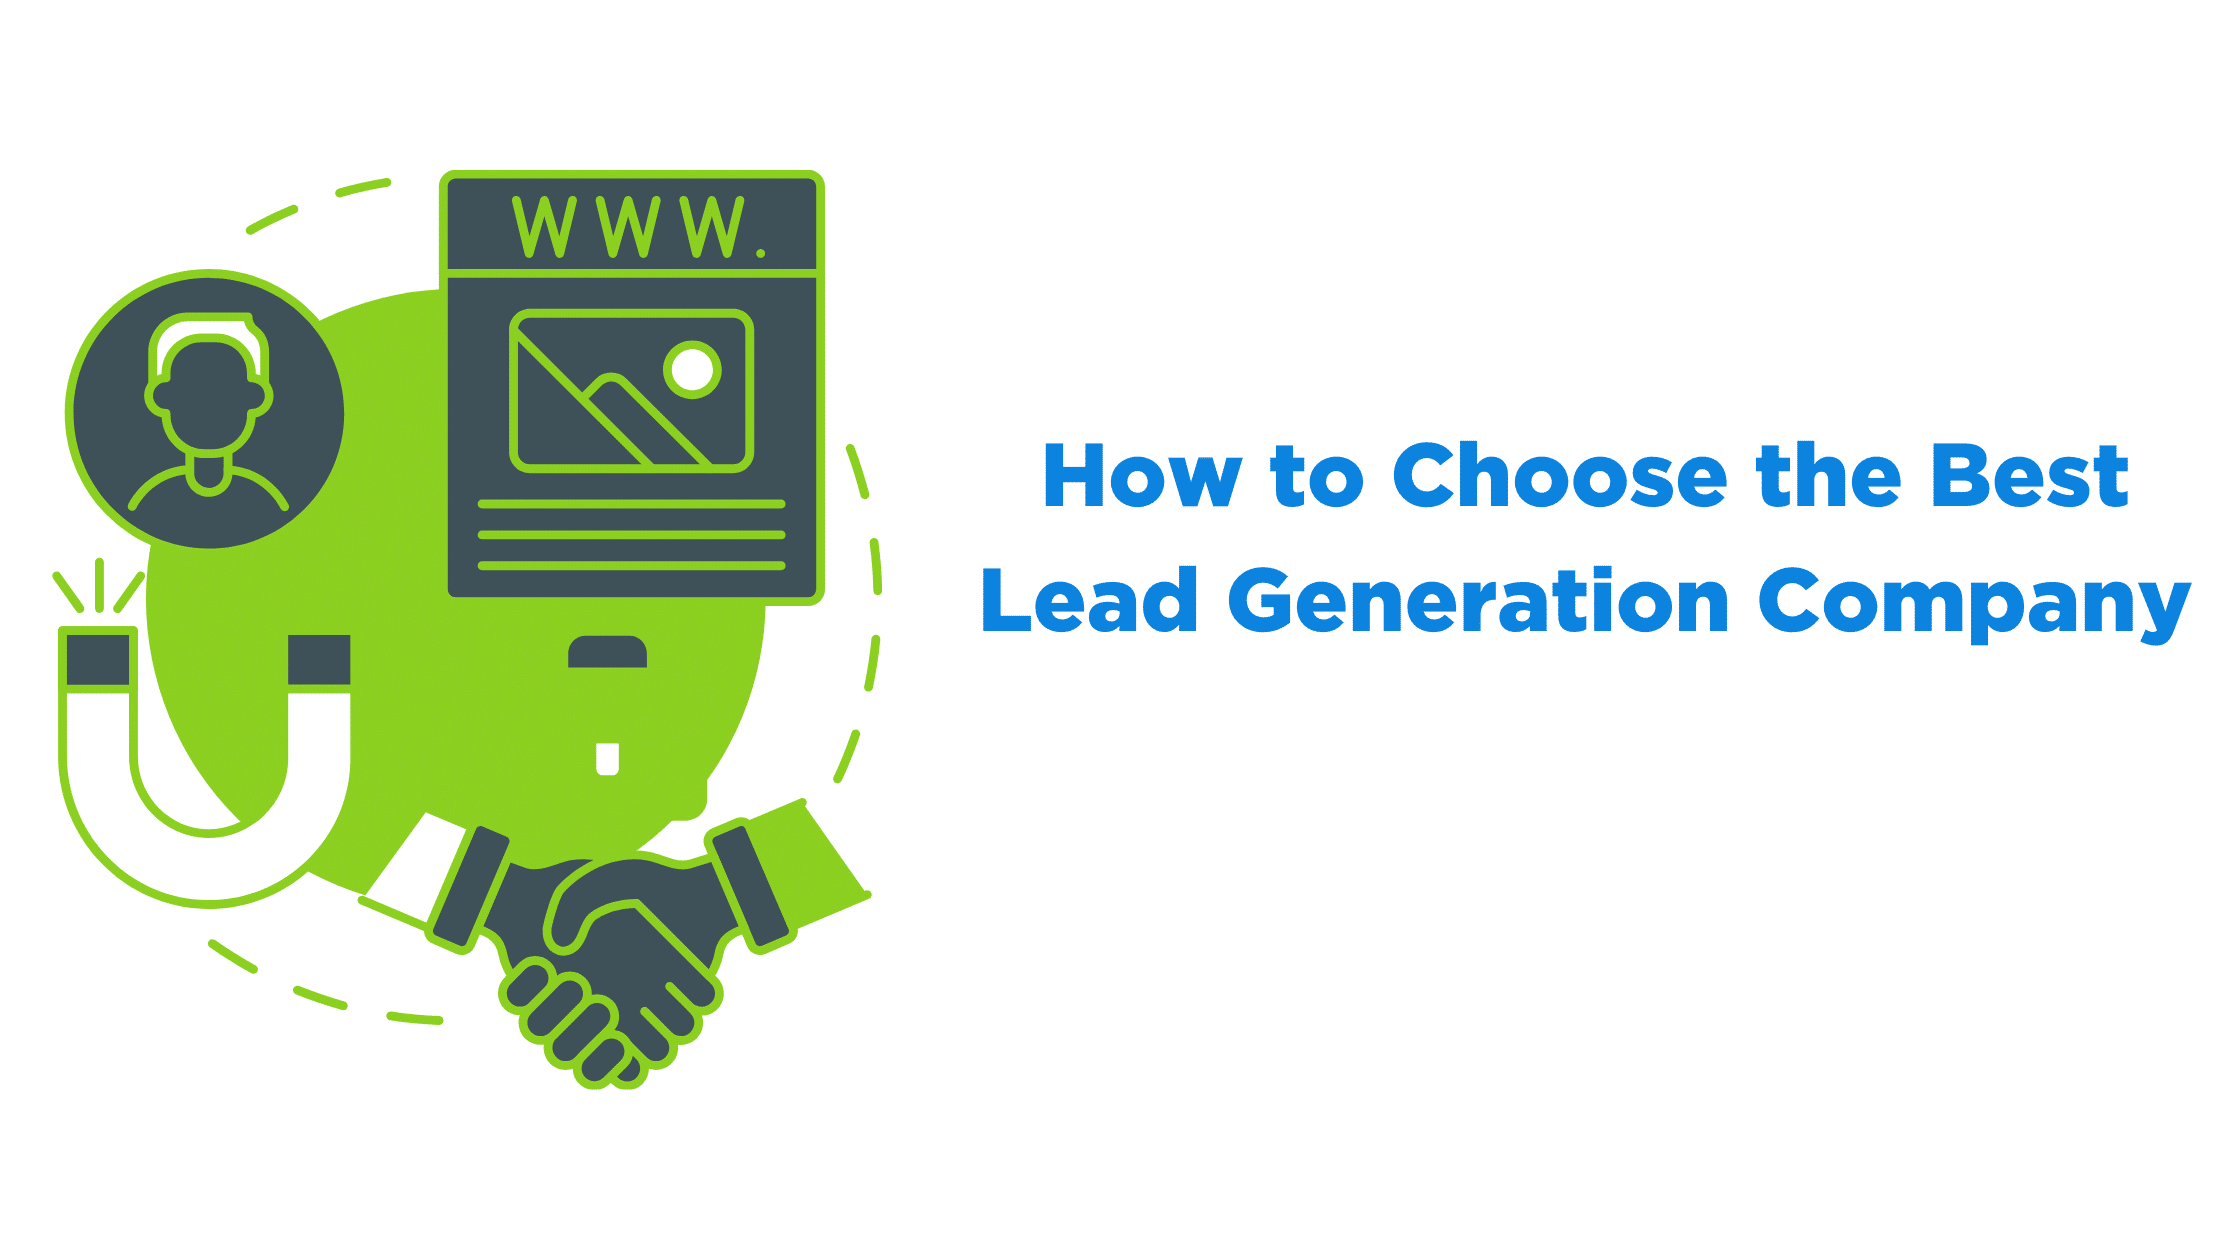 How To Choose The Best Lead Generation Company